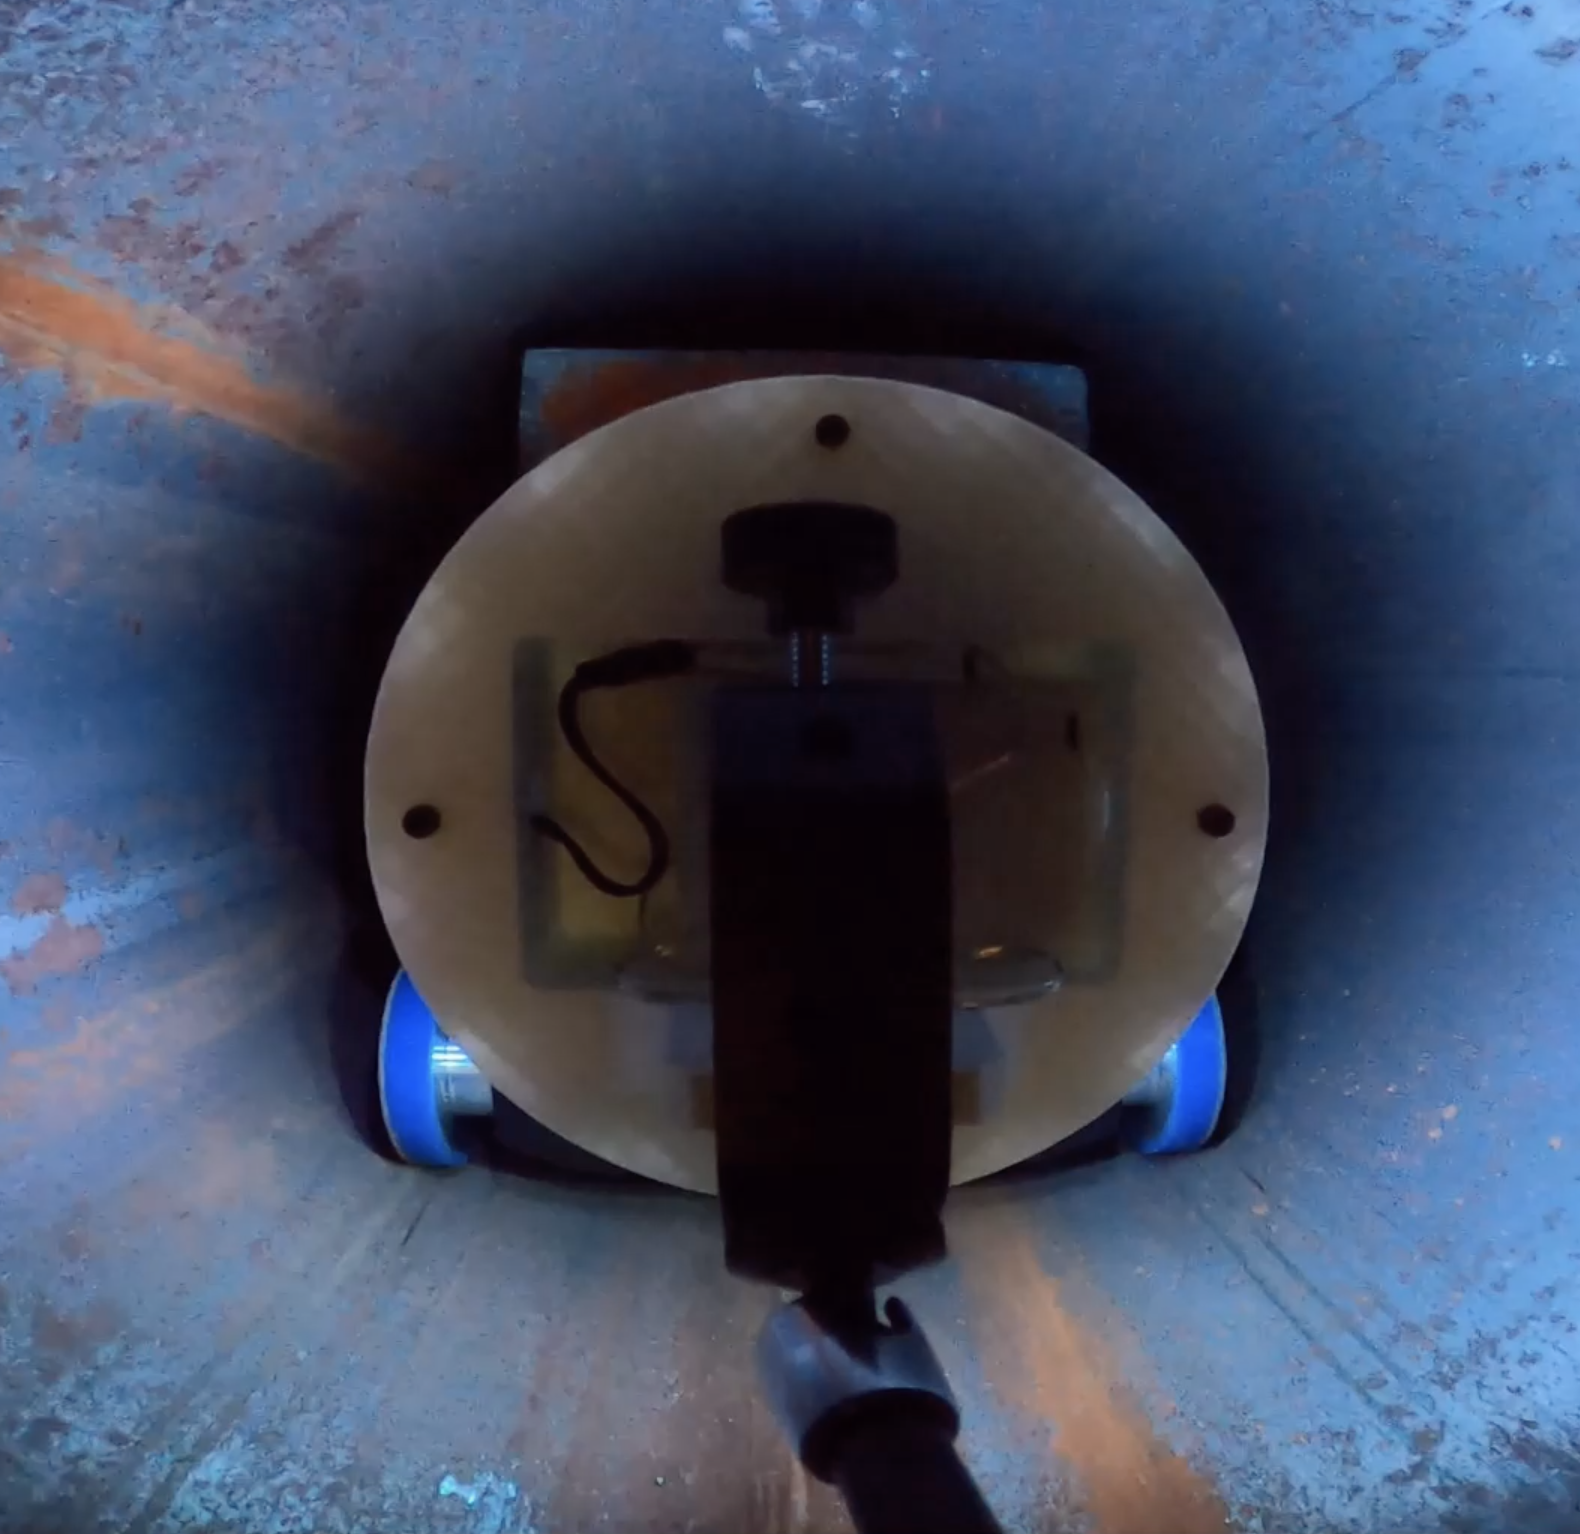 Robotics Institute researchers are developing a modular robot that can creep inside natural gas pipelines to map the pipes, detect leaks and, when necessary, make repairs.